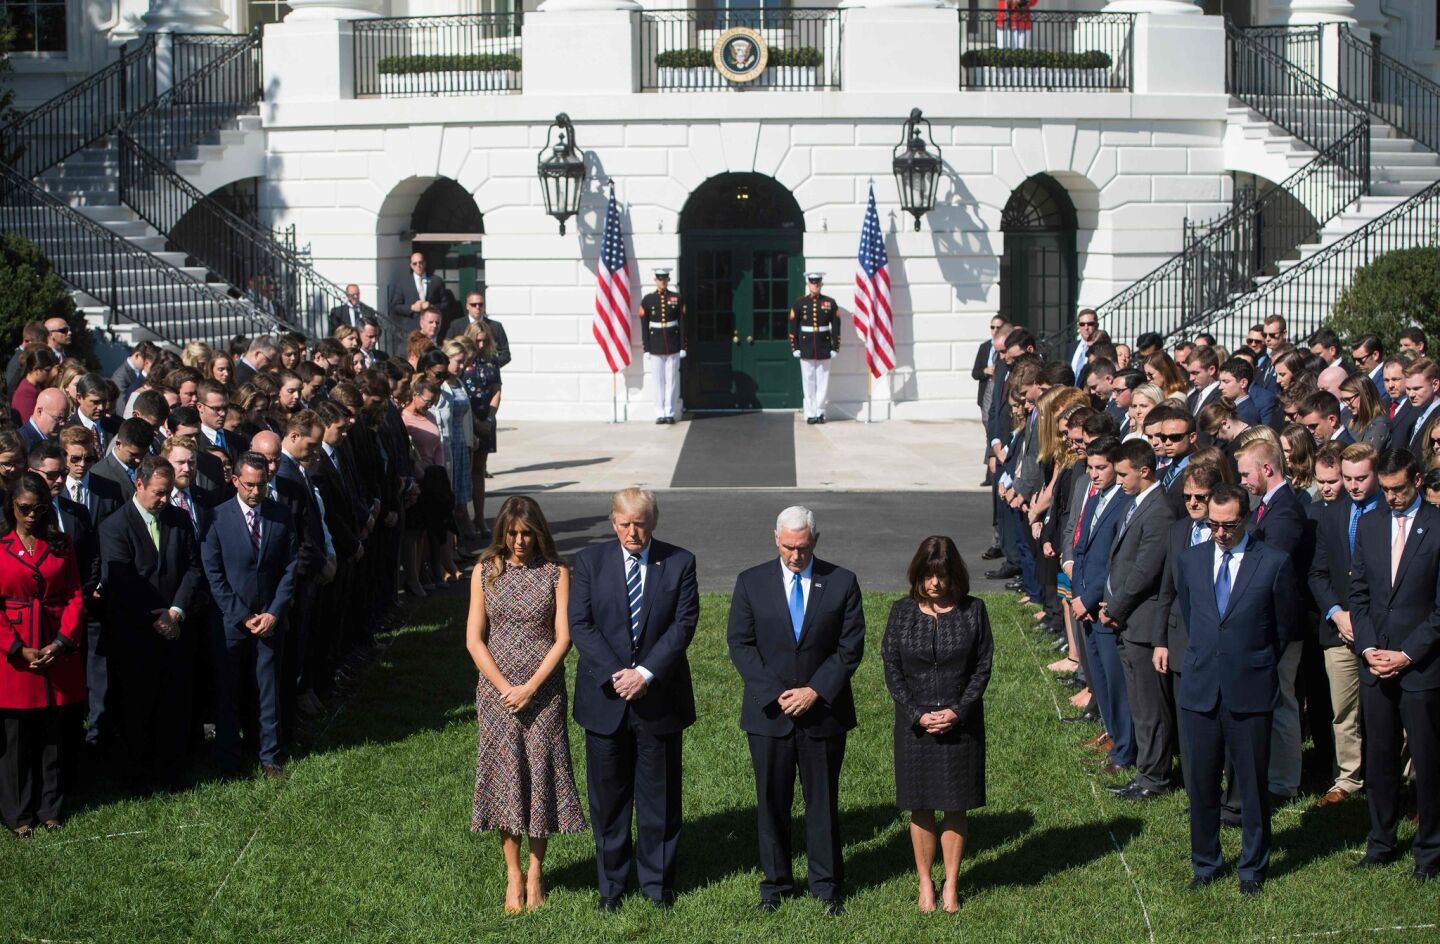 President Donald Trump, First Lady Melania Trump, Vice President Mike Pence and his wife, Karen, participate in a moment of silence on the South Lawn of the White House for victims of the Las Vegas mass shooting.